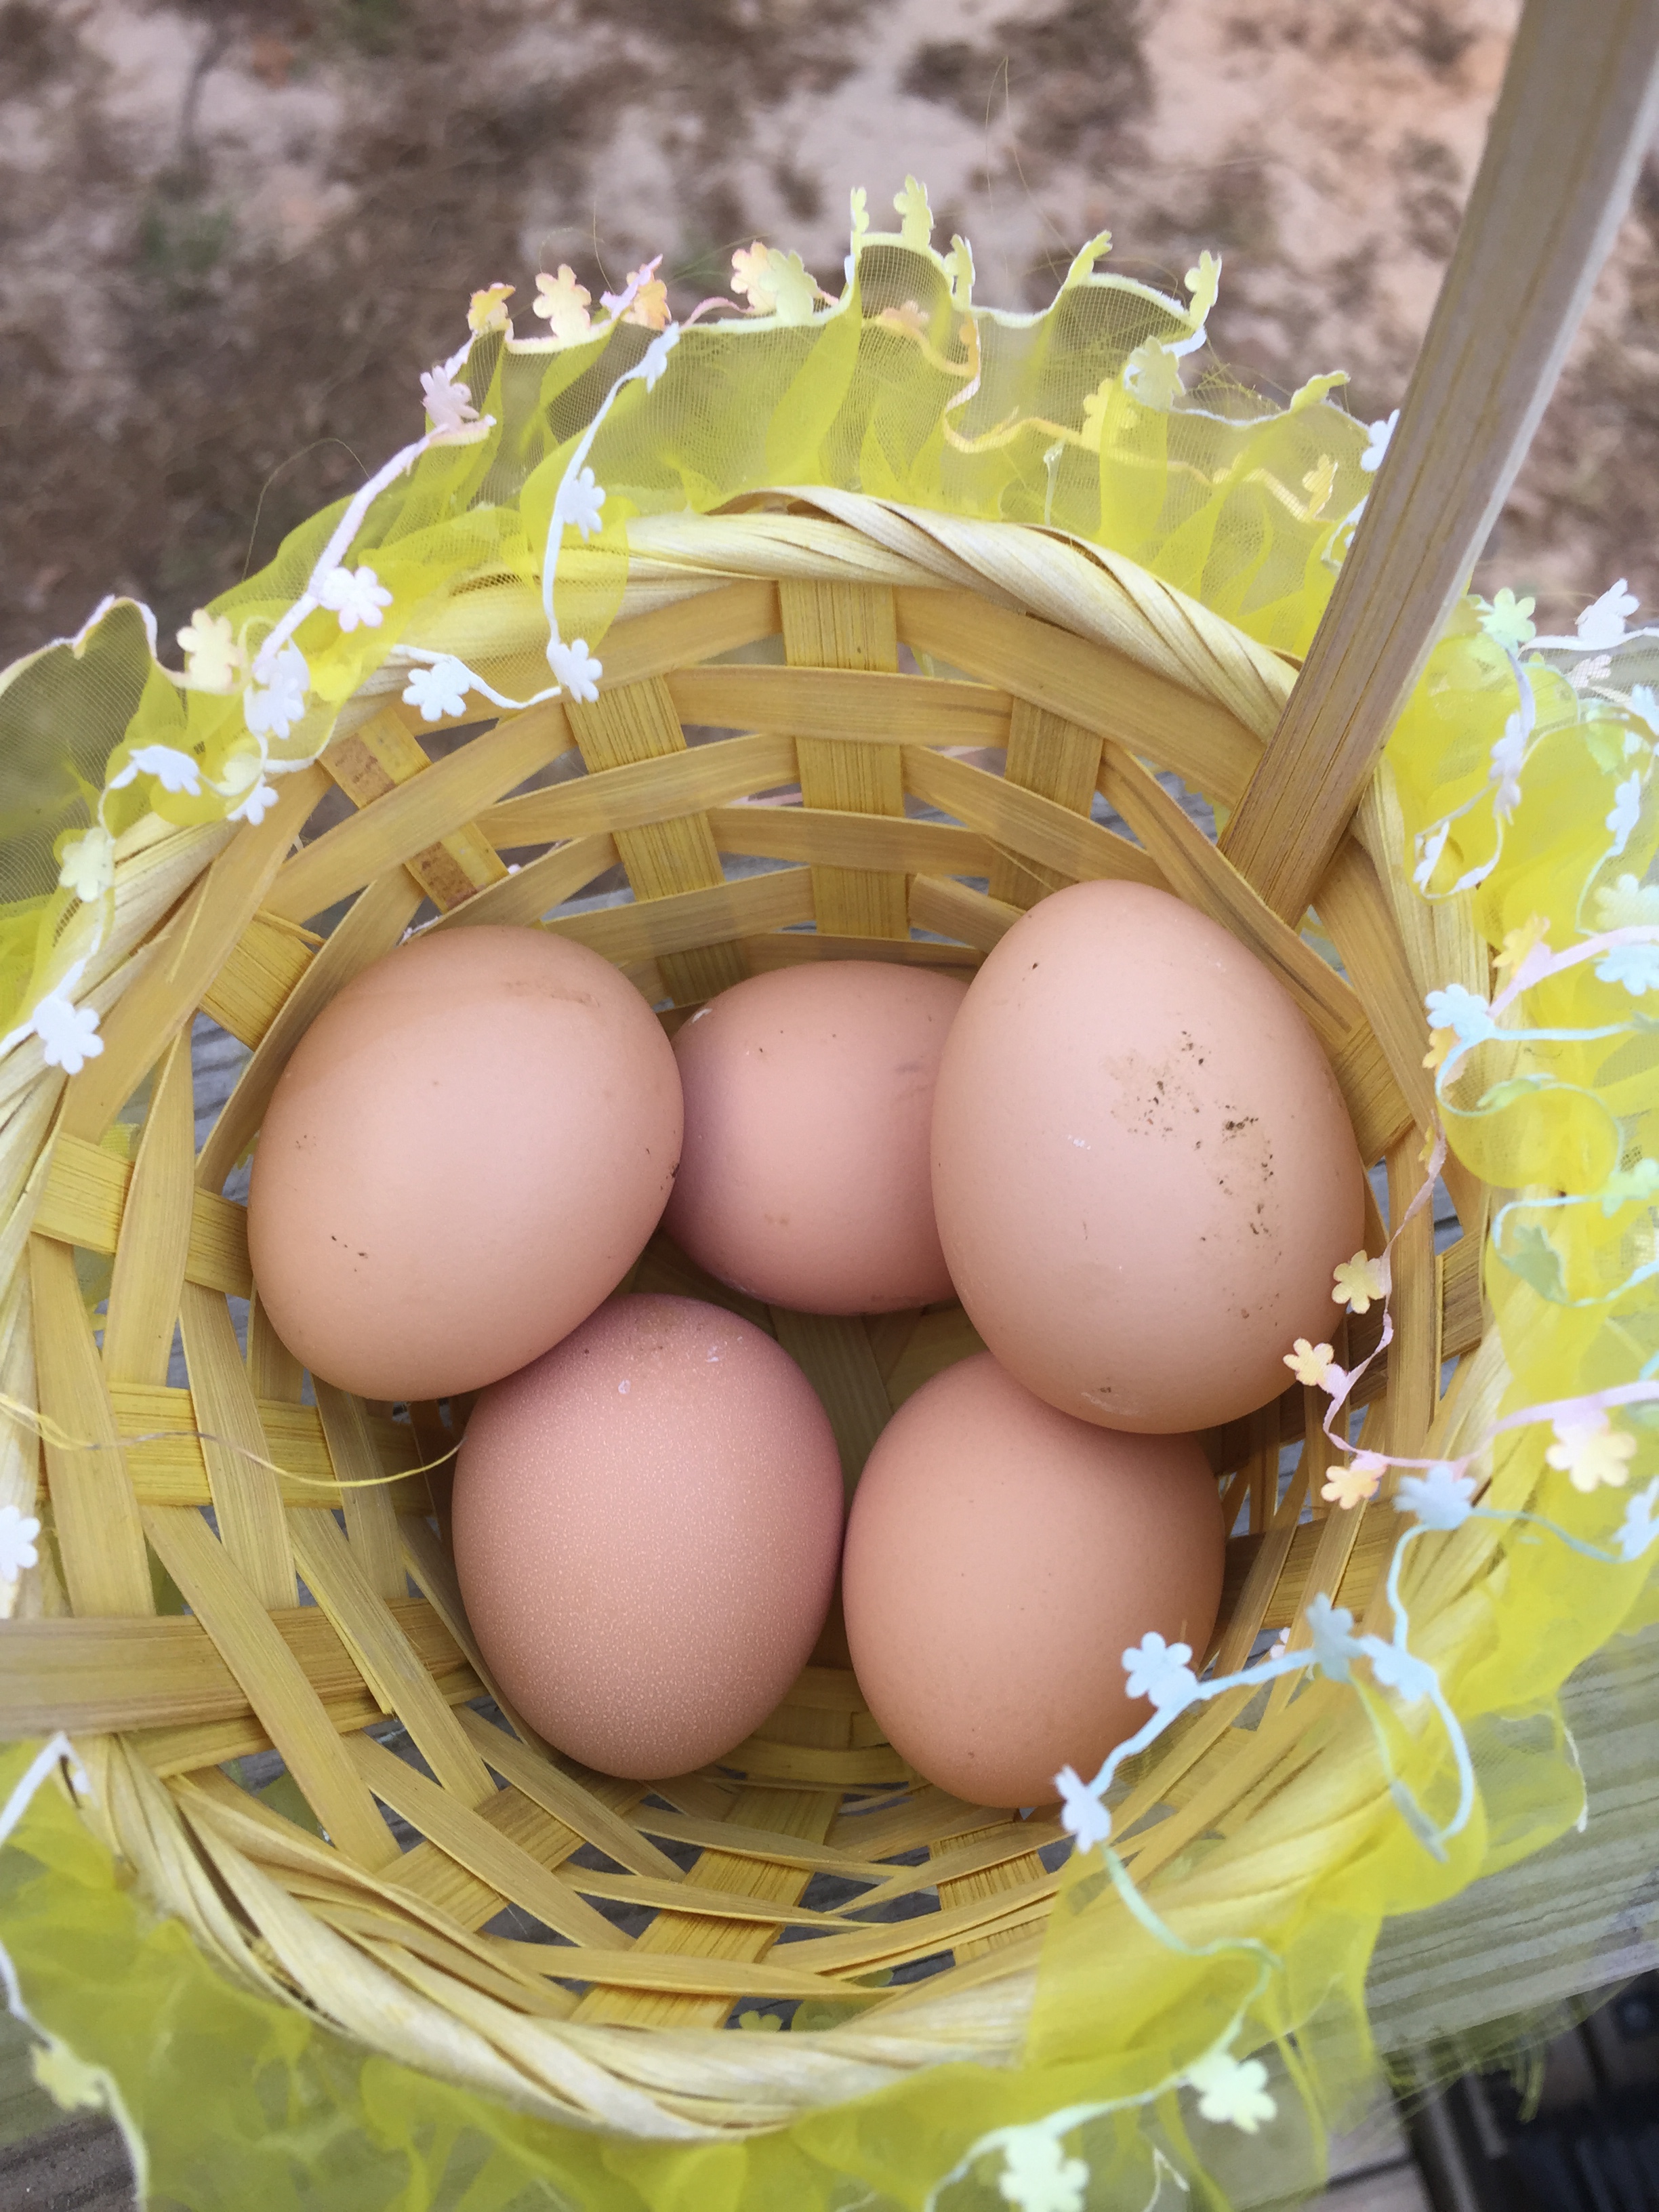 LOL.. My silly wife gathered eggs in a Easter basket. (which I suppose was fitting)